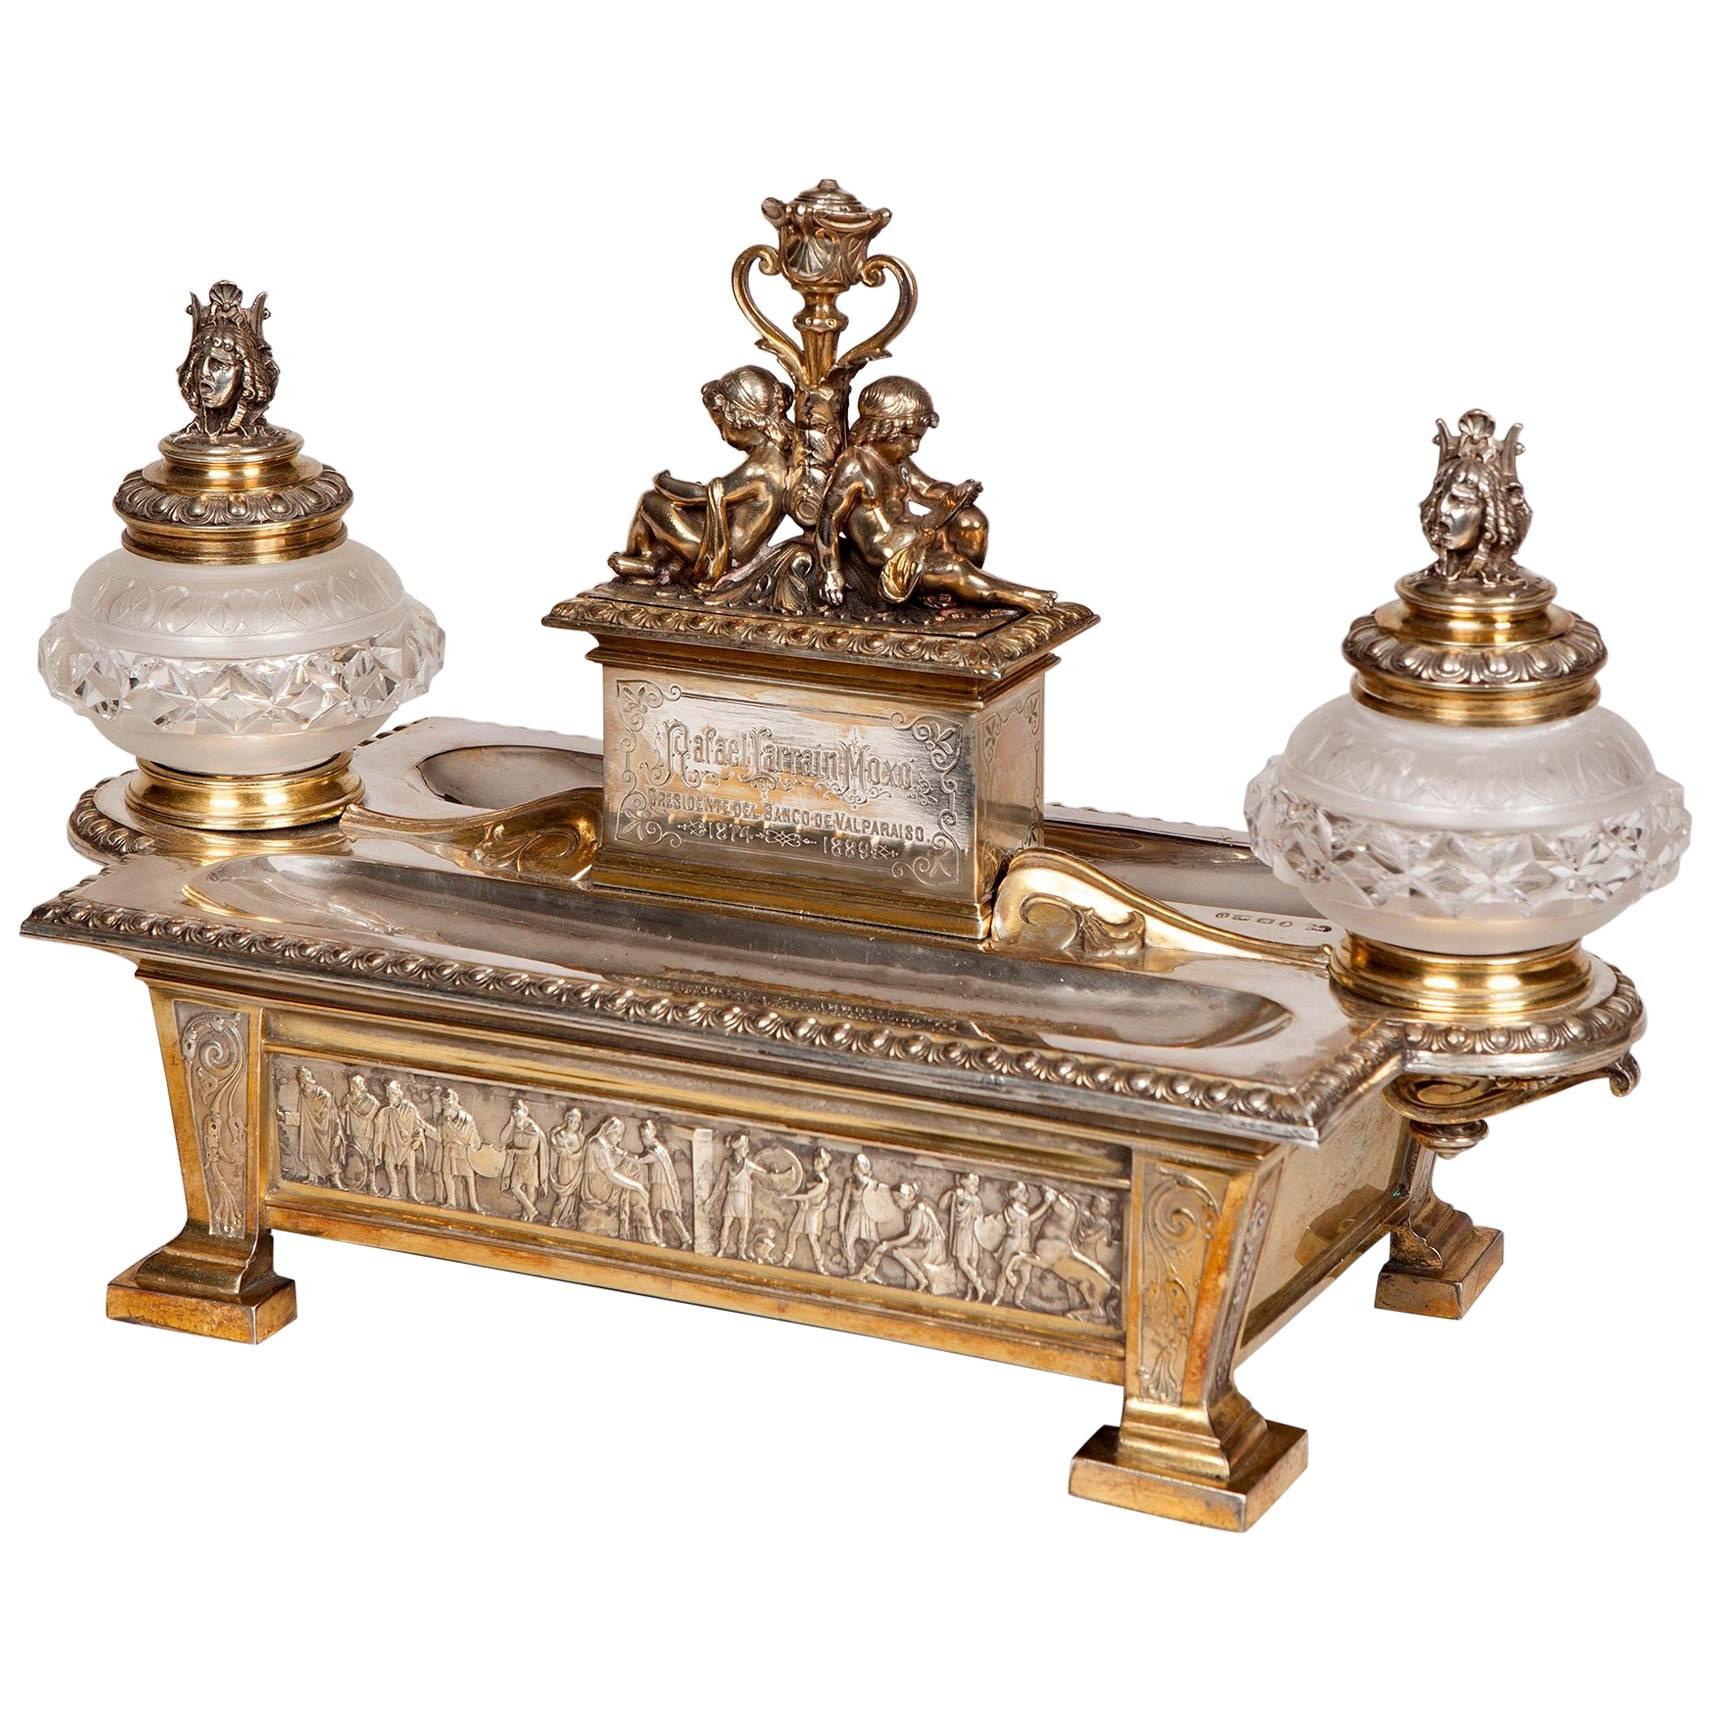 English Silver Inkstand Presented to a Chilean Politician by Elkington